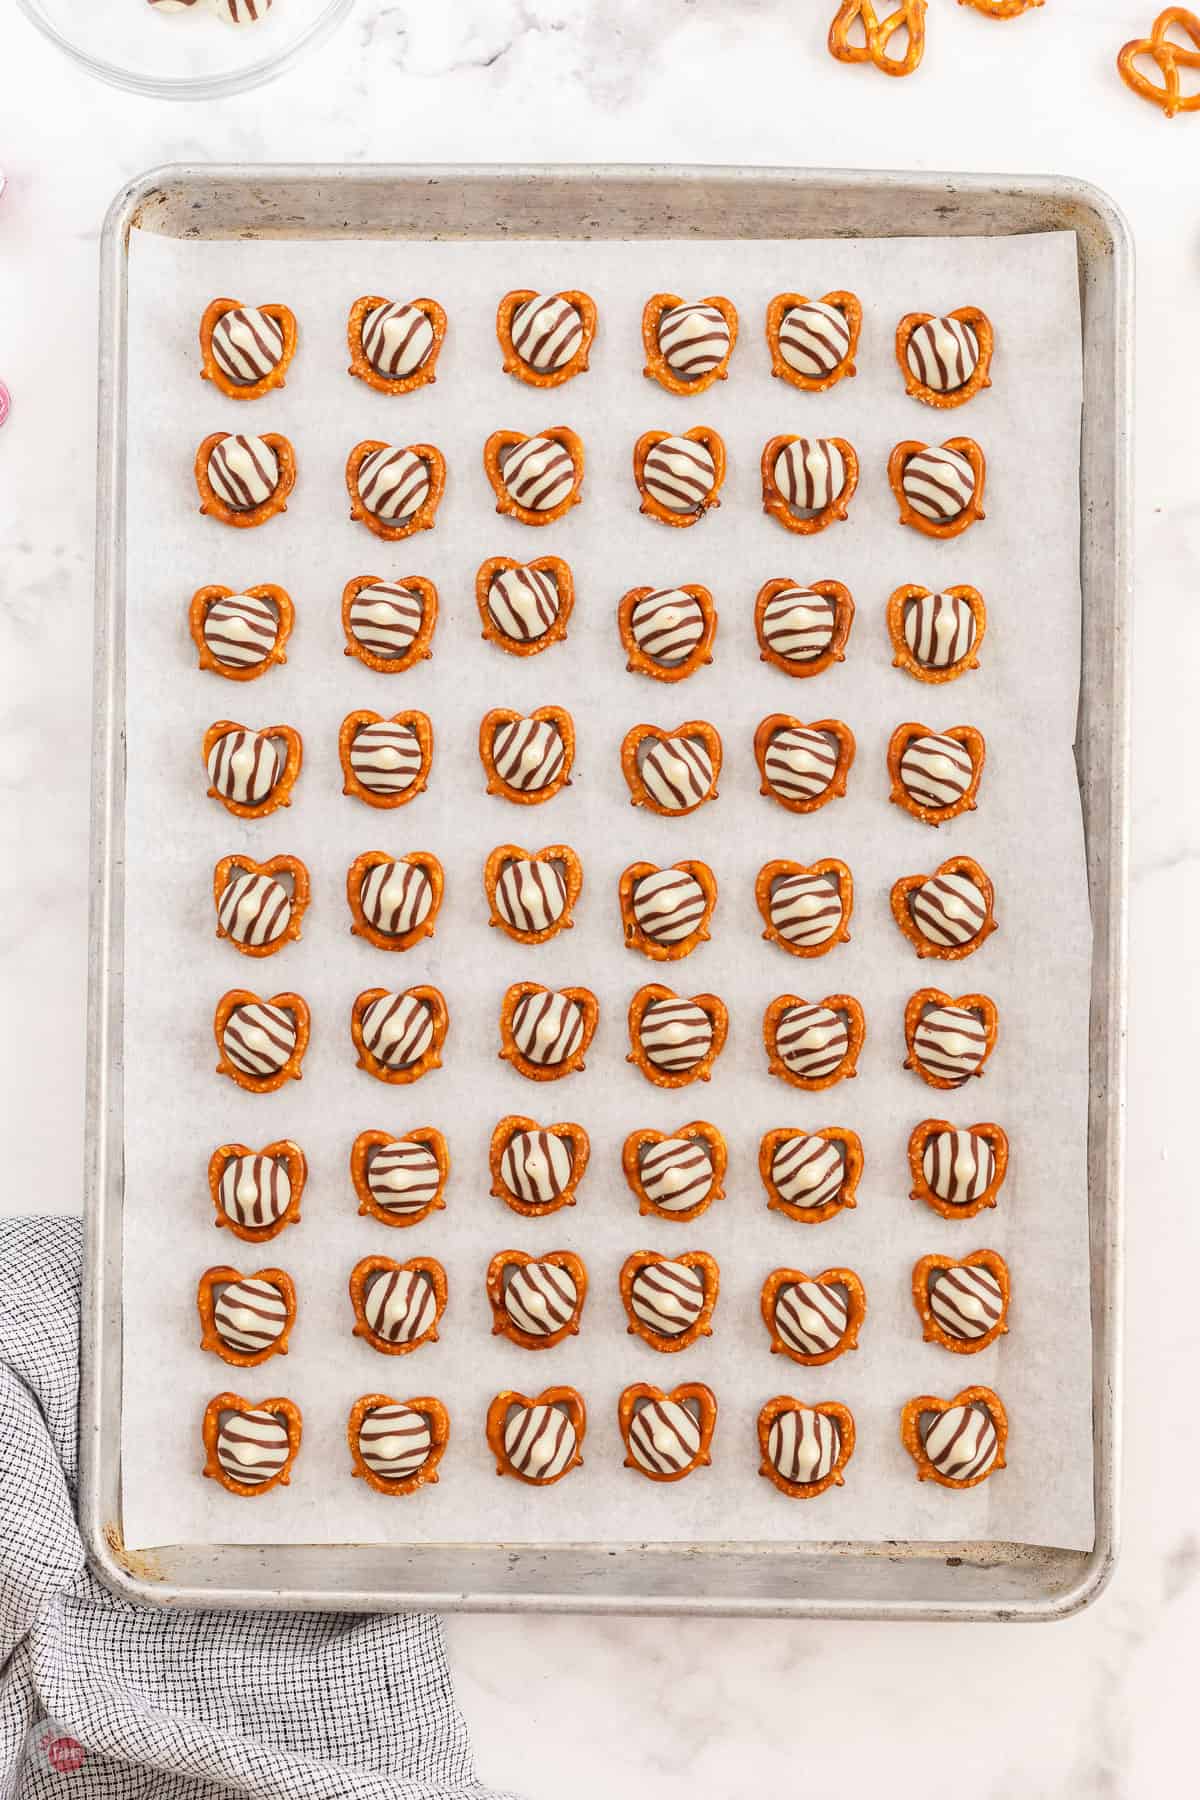 pretzel on a baking sheet topped with hugs